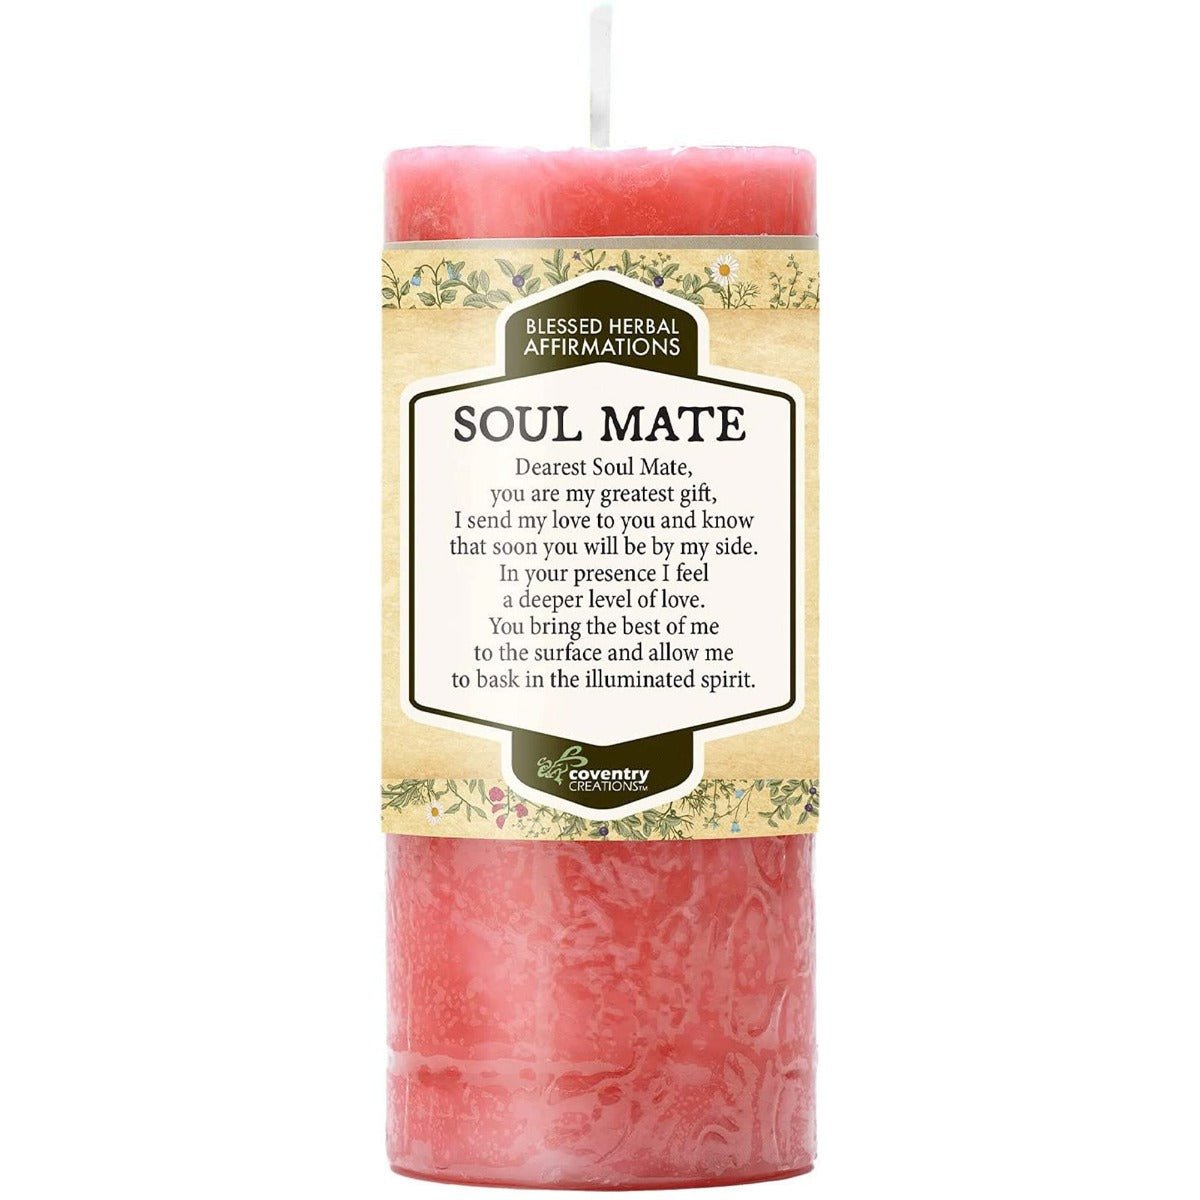 Soul Mate Affirmation Candle - 13 Moons